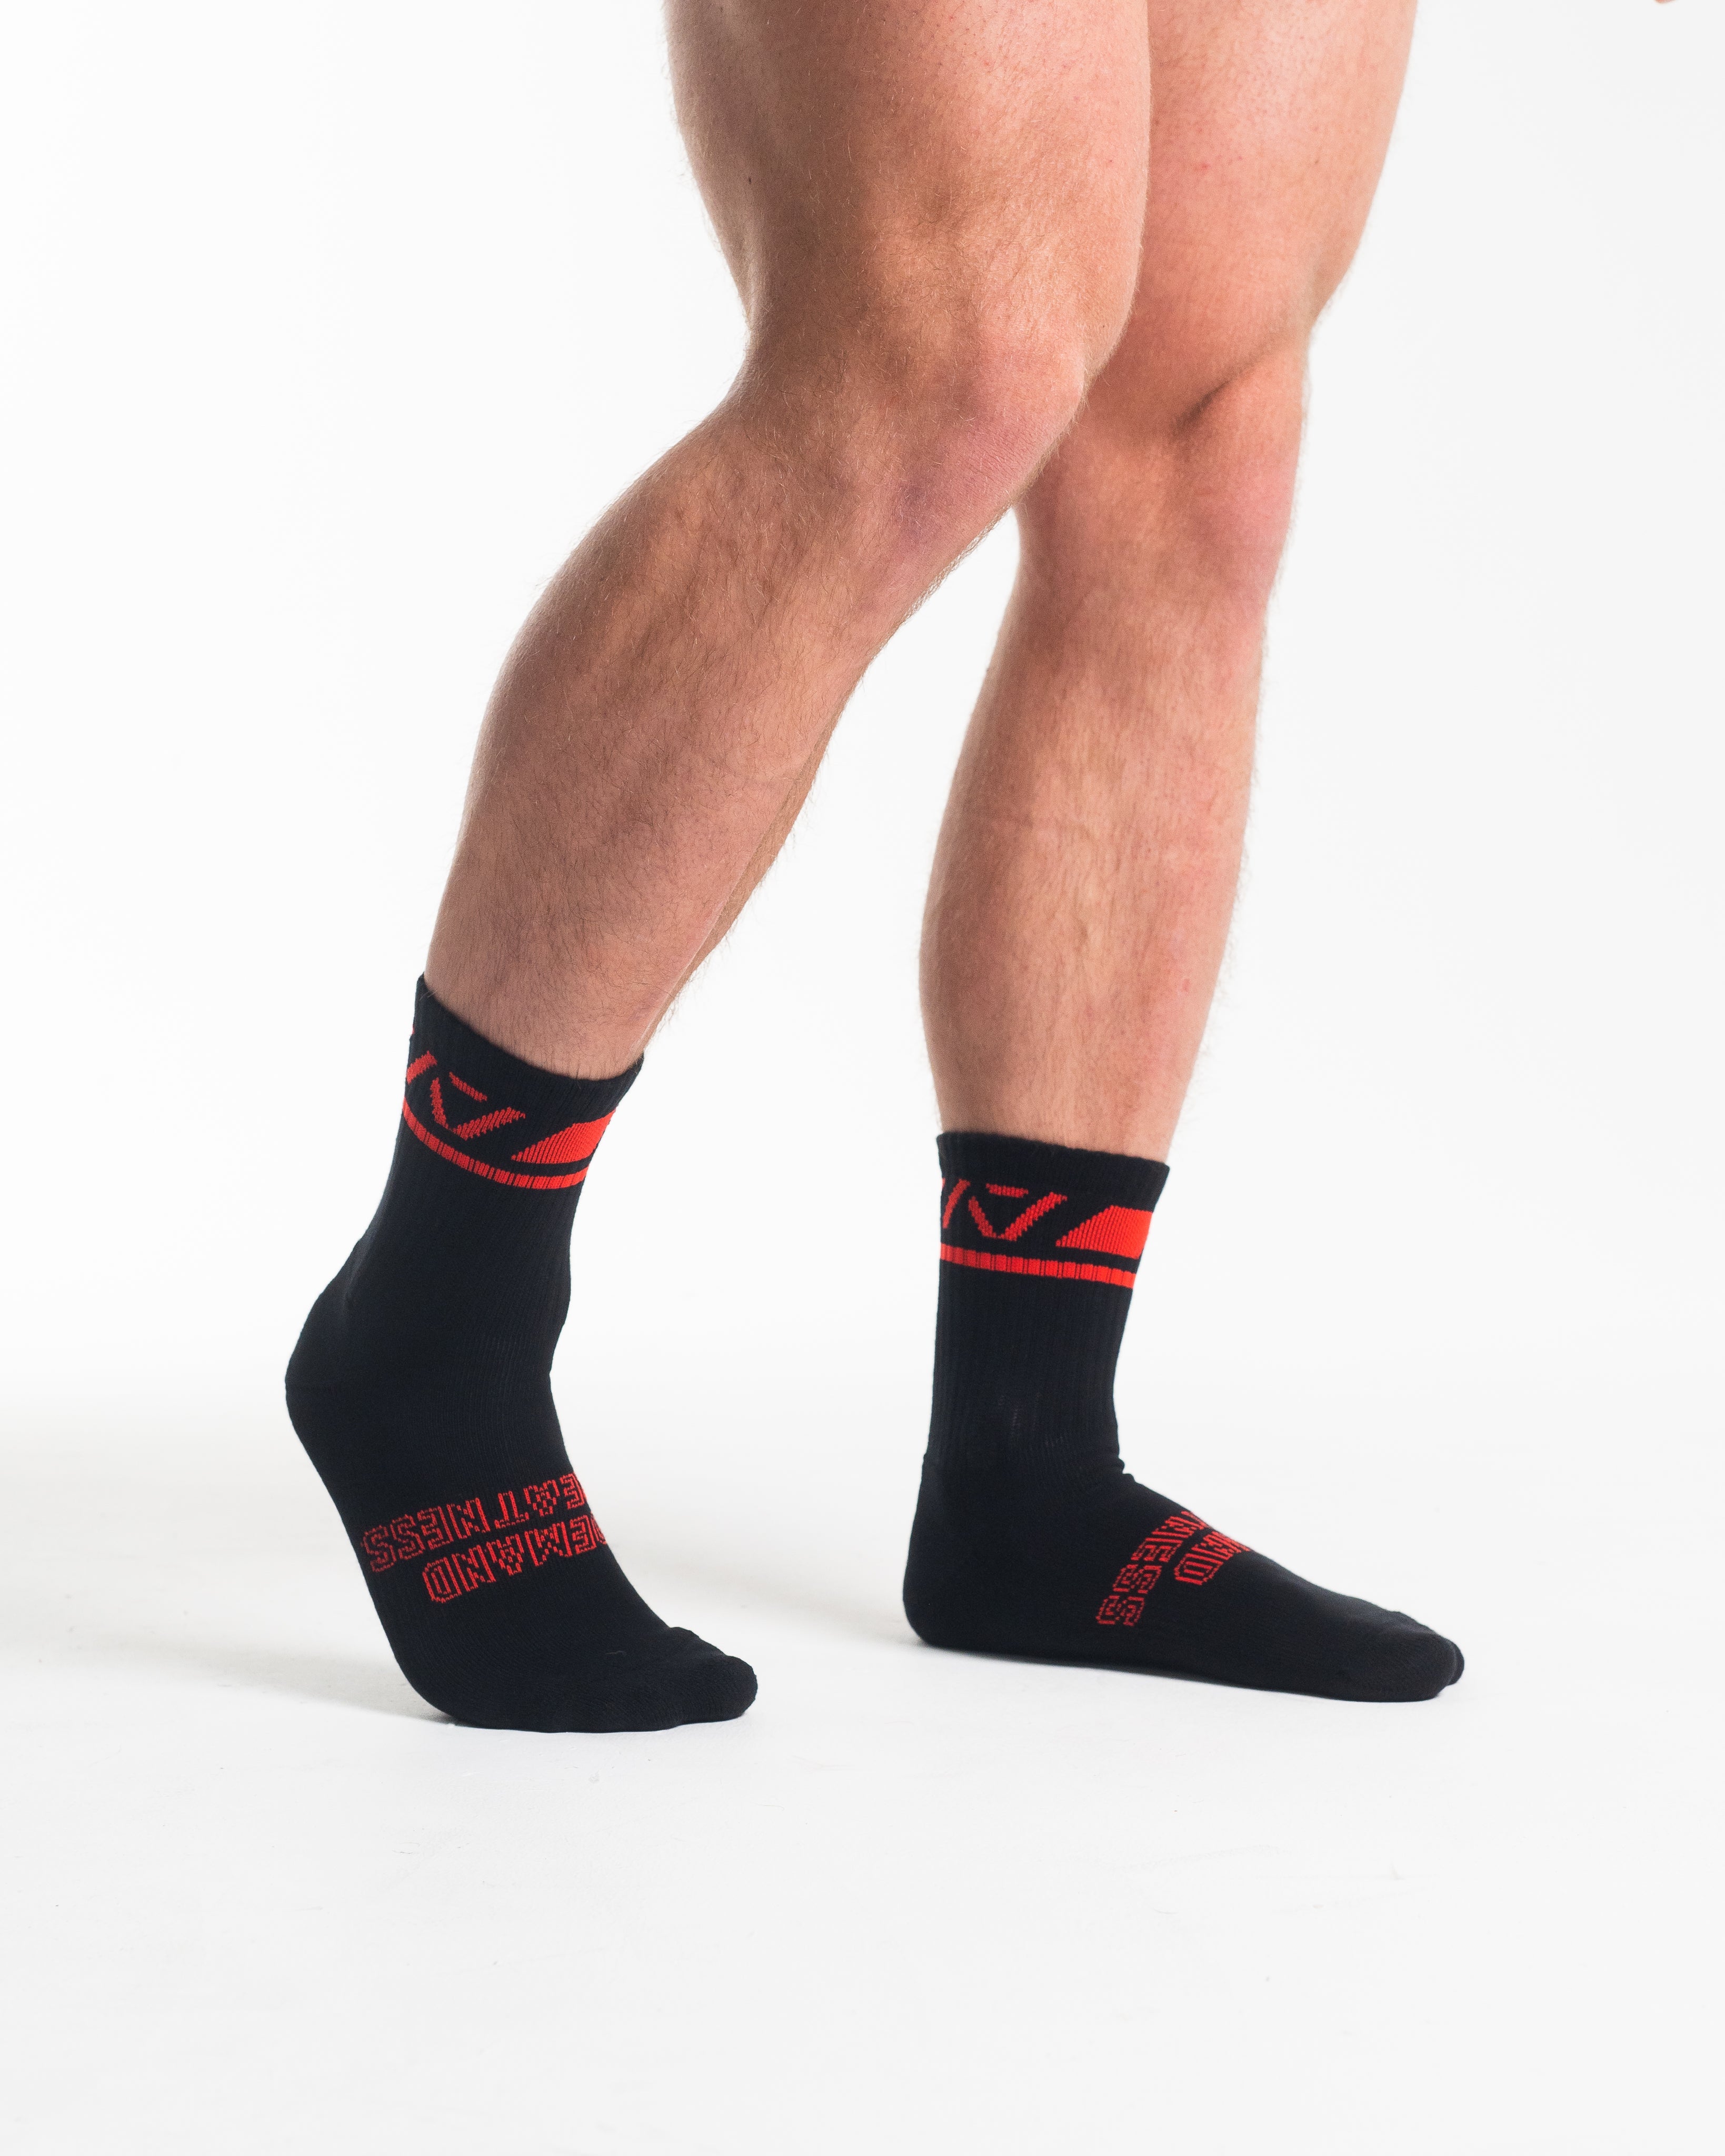 A7 Red Dawn Crew socks showcase dark grey logos to keep contrast at a minimum and let your energy show on the platform, in your training or while out and about. The IPF Approved Shadow Stone Meet Kit includes Powerlifting Singlet, A7 Meet Shirt, A7 Zebra Wrist Wraps, A7 Deadlift Socks, Hourglass Knee Sleeves (Stiff Knee Sleeves and Rigor Mortis Knee Sleeves). All A7 Powerlifting Equipment shipping to UK, Norway, Switzerland and Iceland.